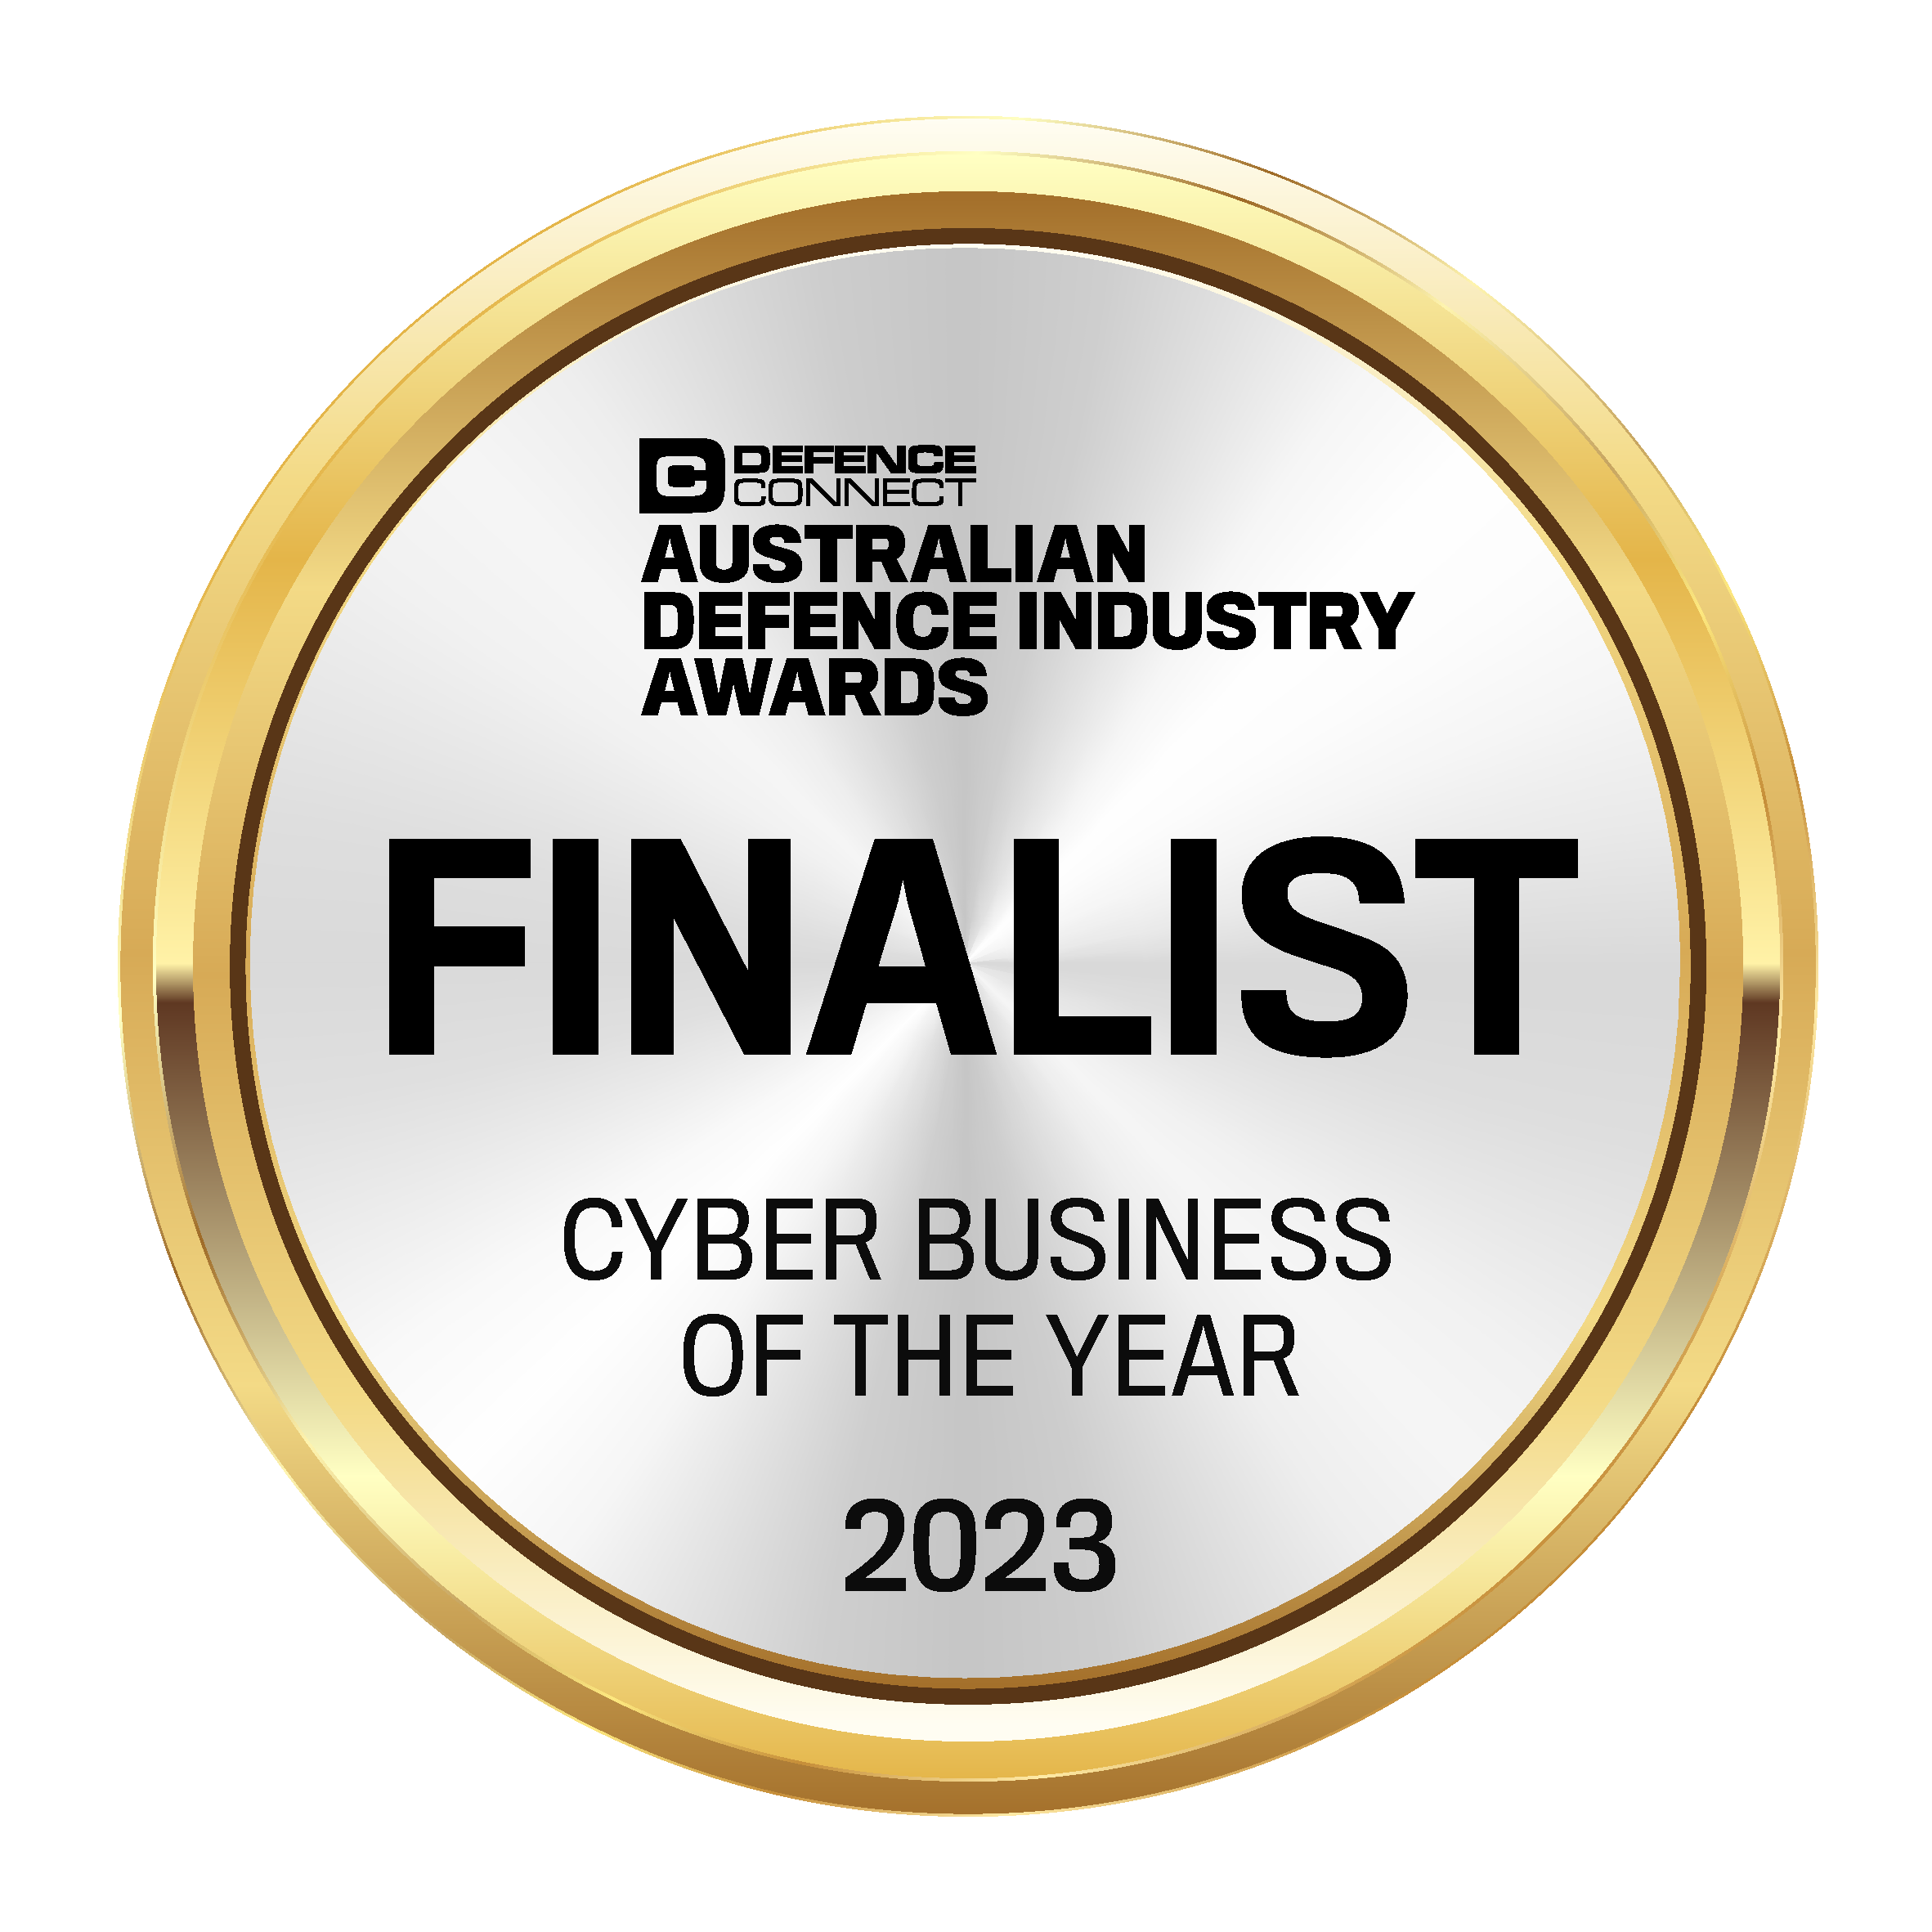 Australian Defence Industry Awards for Cyber Business of the Year